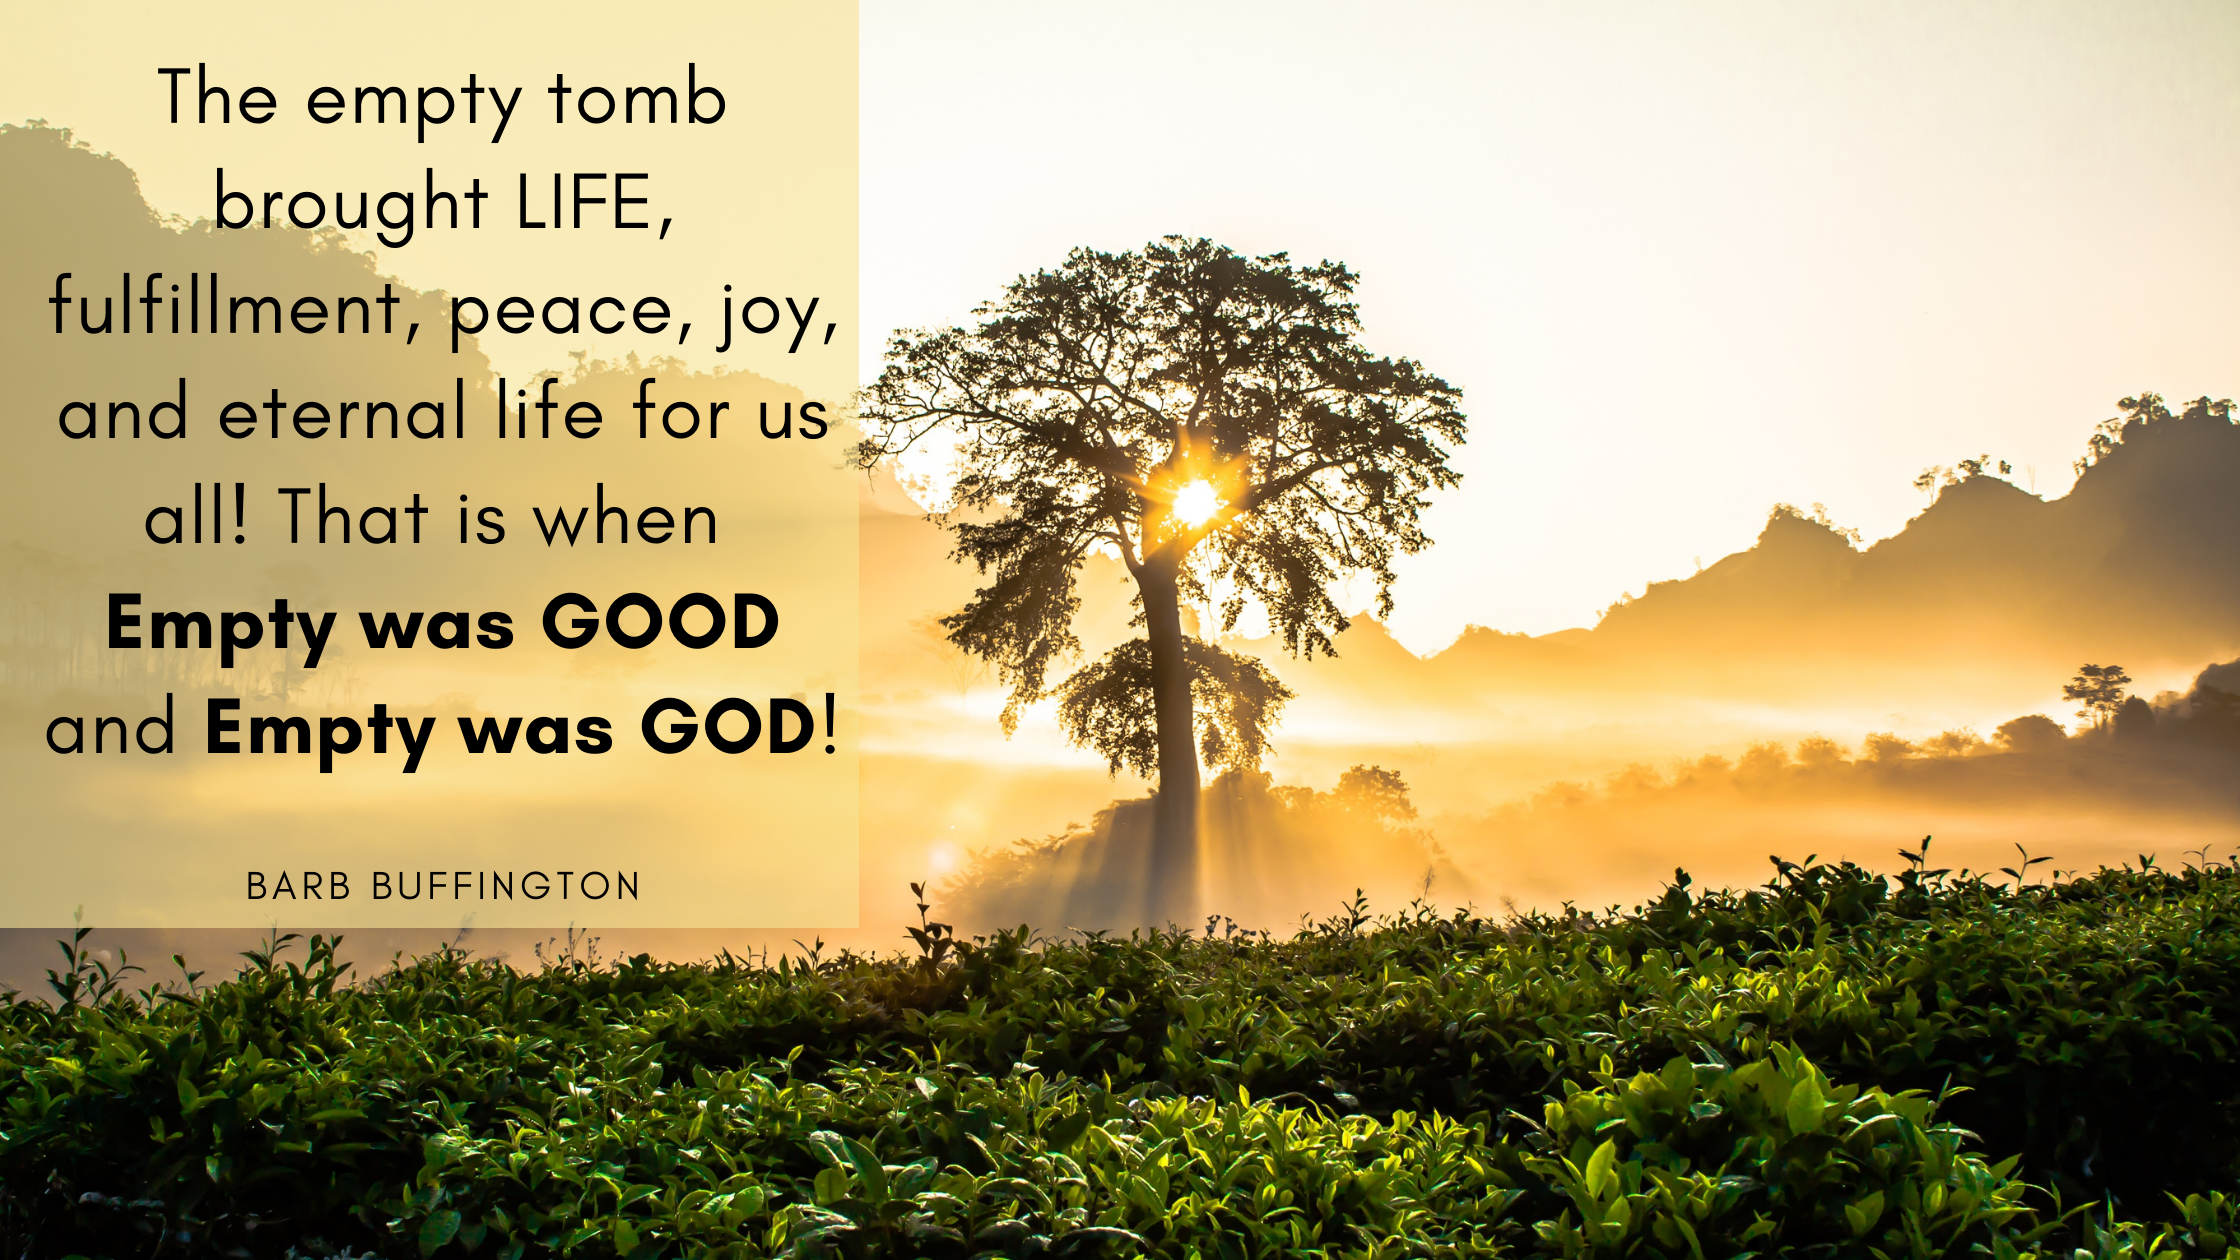 The empty tomb brought LIFE, fulfillment, peace, joy, and eternal life for us all! That is when Empty was GOOD and Empty was GOD!